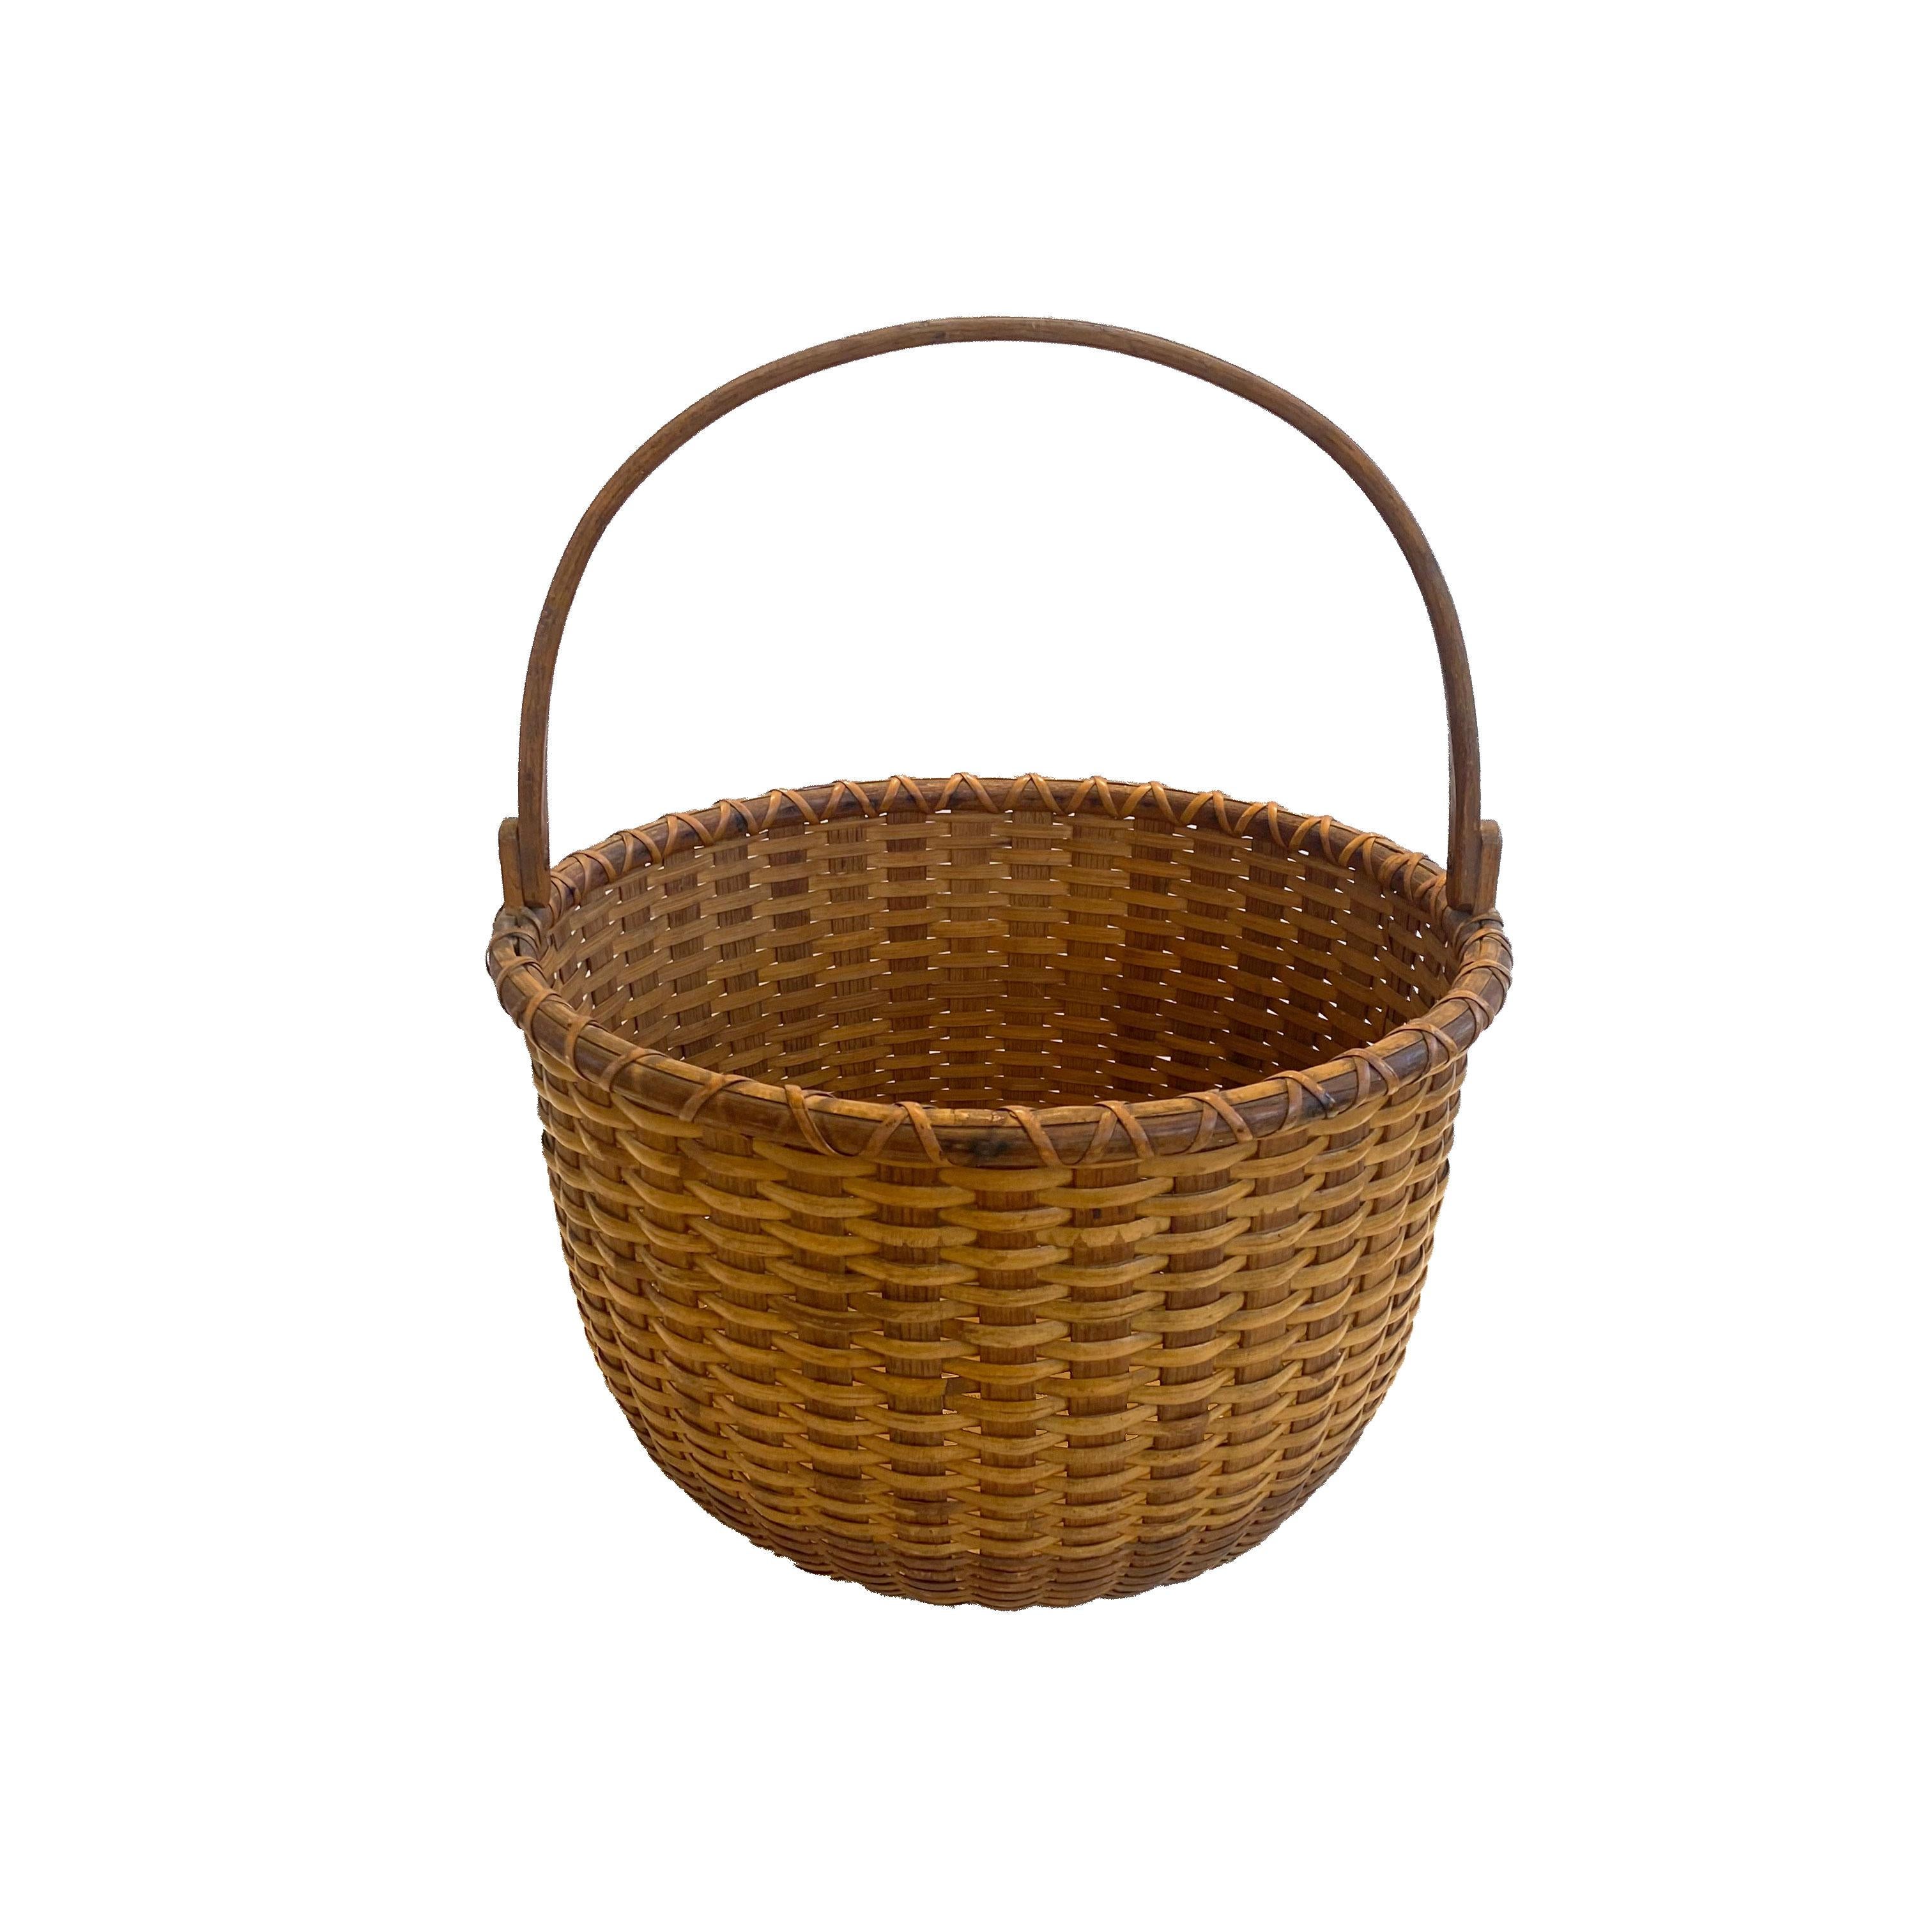 10 ½” Open round Nantucket lightship basket with carved wooden oak ears with oak staves, handle and rim. The bottom is turned out of Pine and the interior is markedin ink with the orignal stencil, 